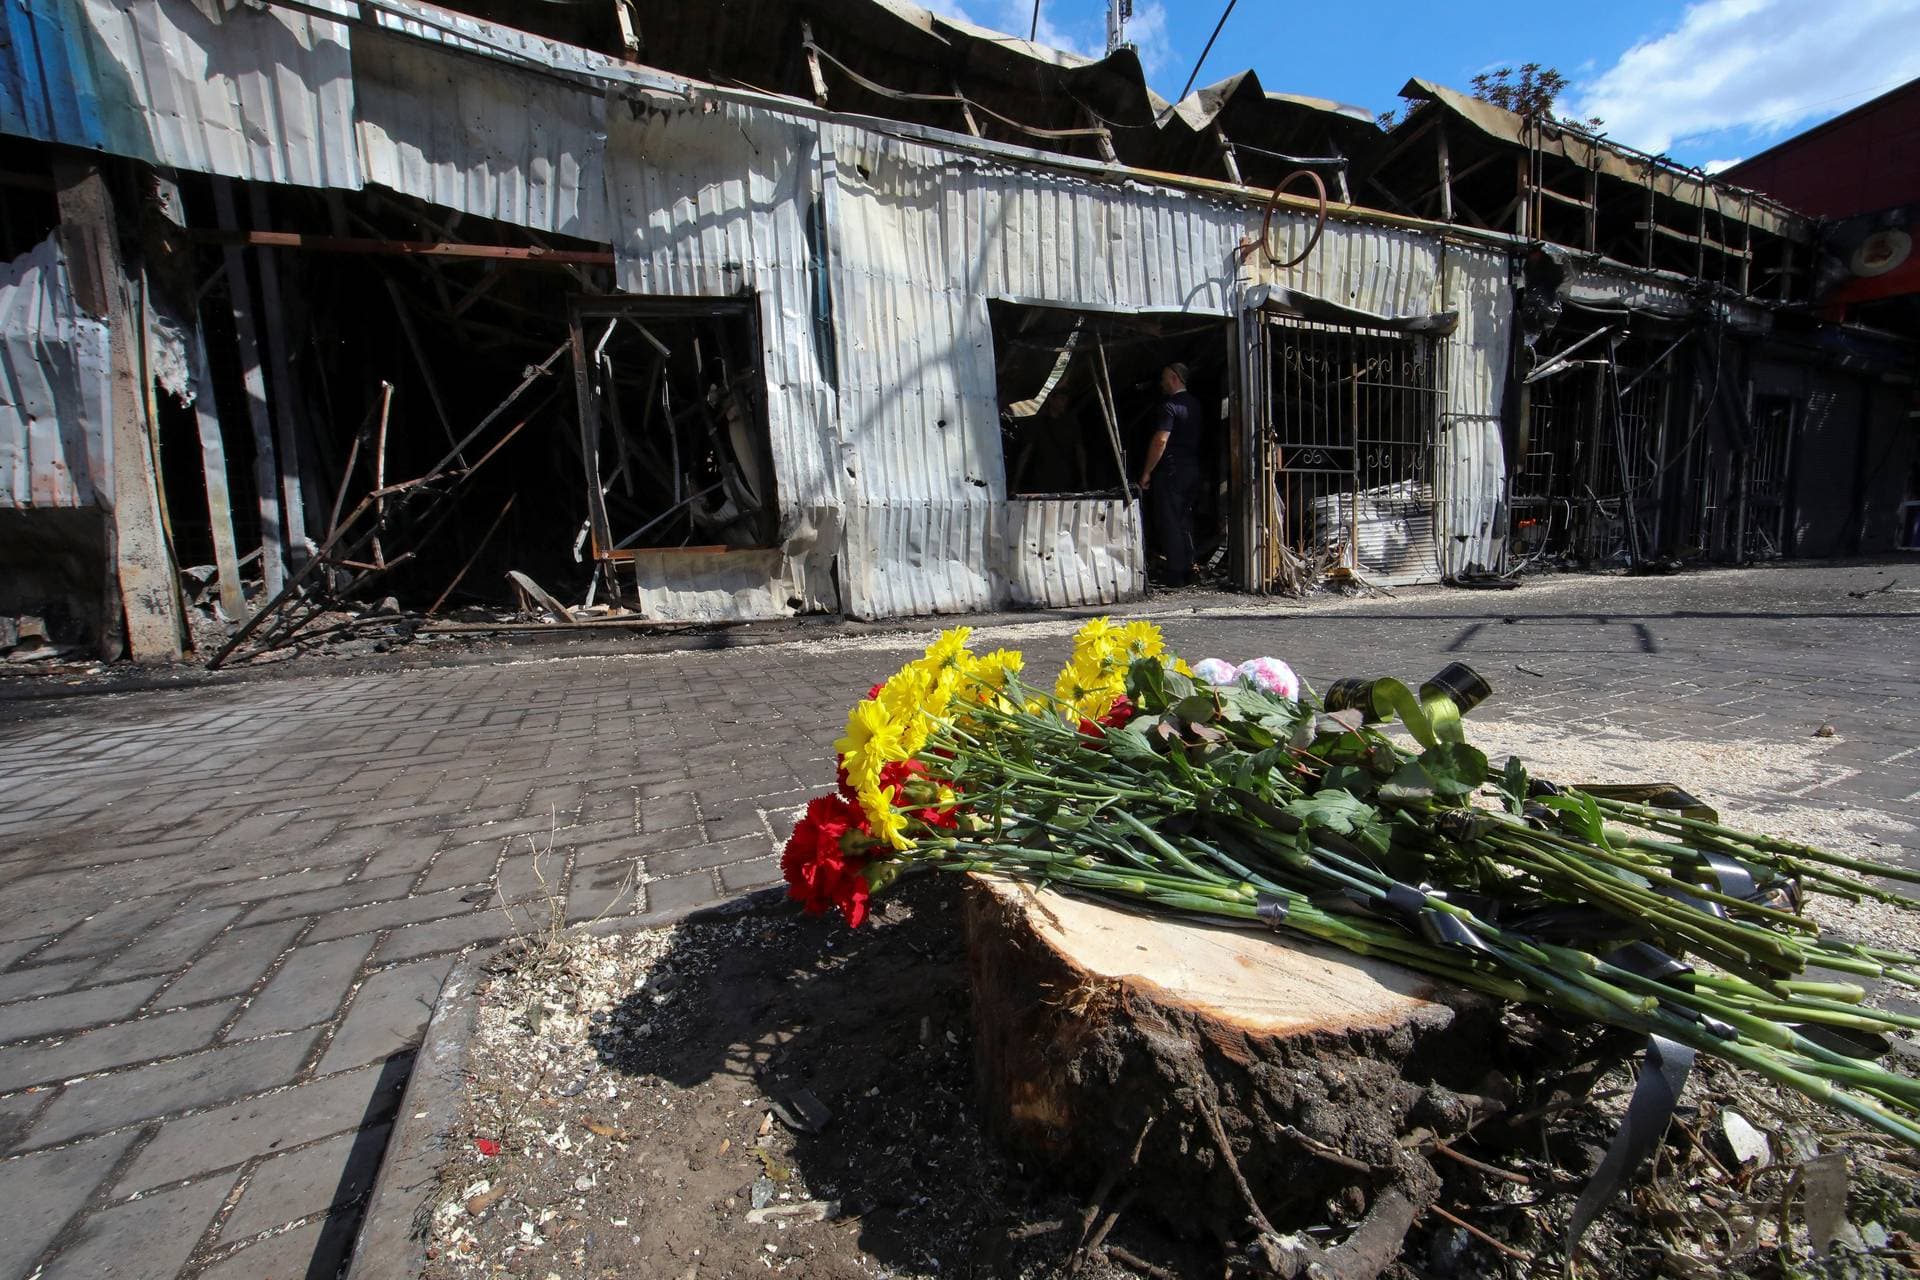 Flowers left by local residents to pay tribute to civilian people killed yesterday are seen at the strike site in Kostiantynivka